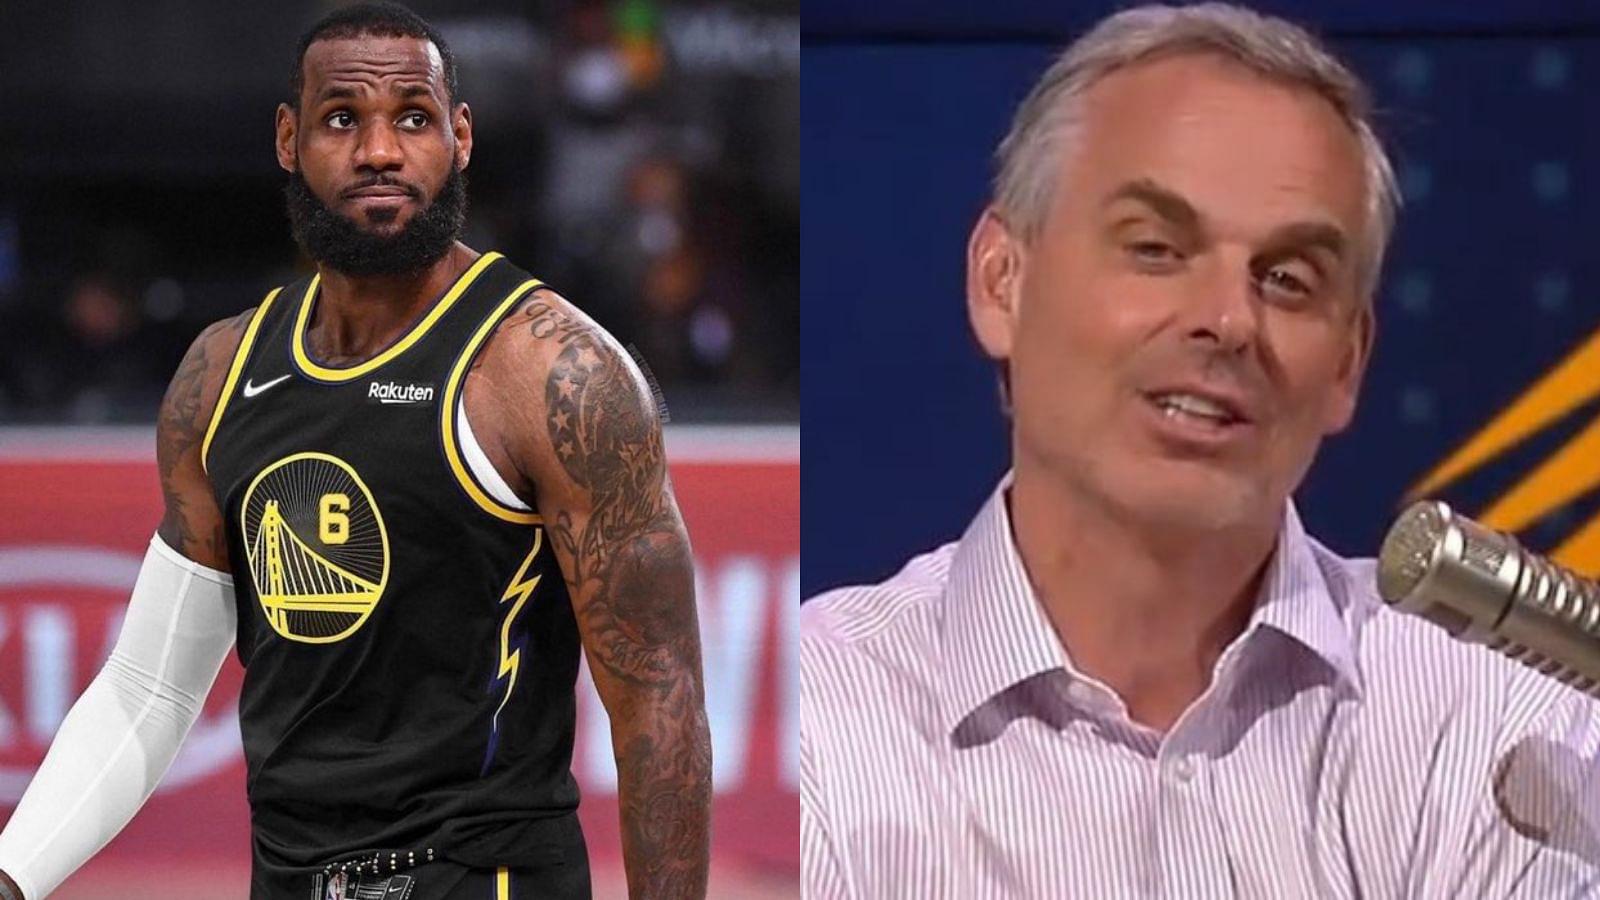 “LeBron James bailed on his hometown twice, also on Pat Riley and Dwyane Wade”: Colin Cowherd is convinced that the 4x MVP will ditch the Lakers as well